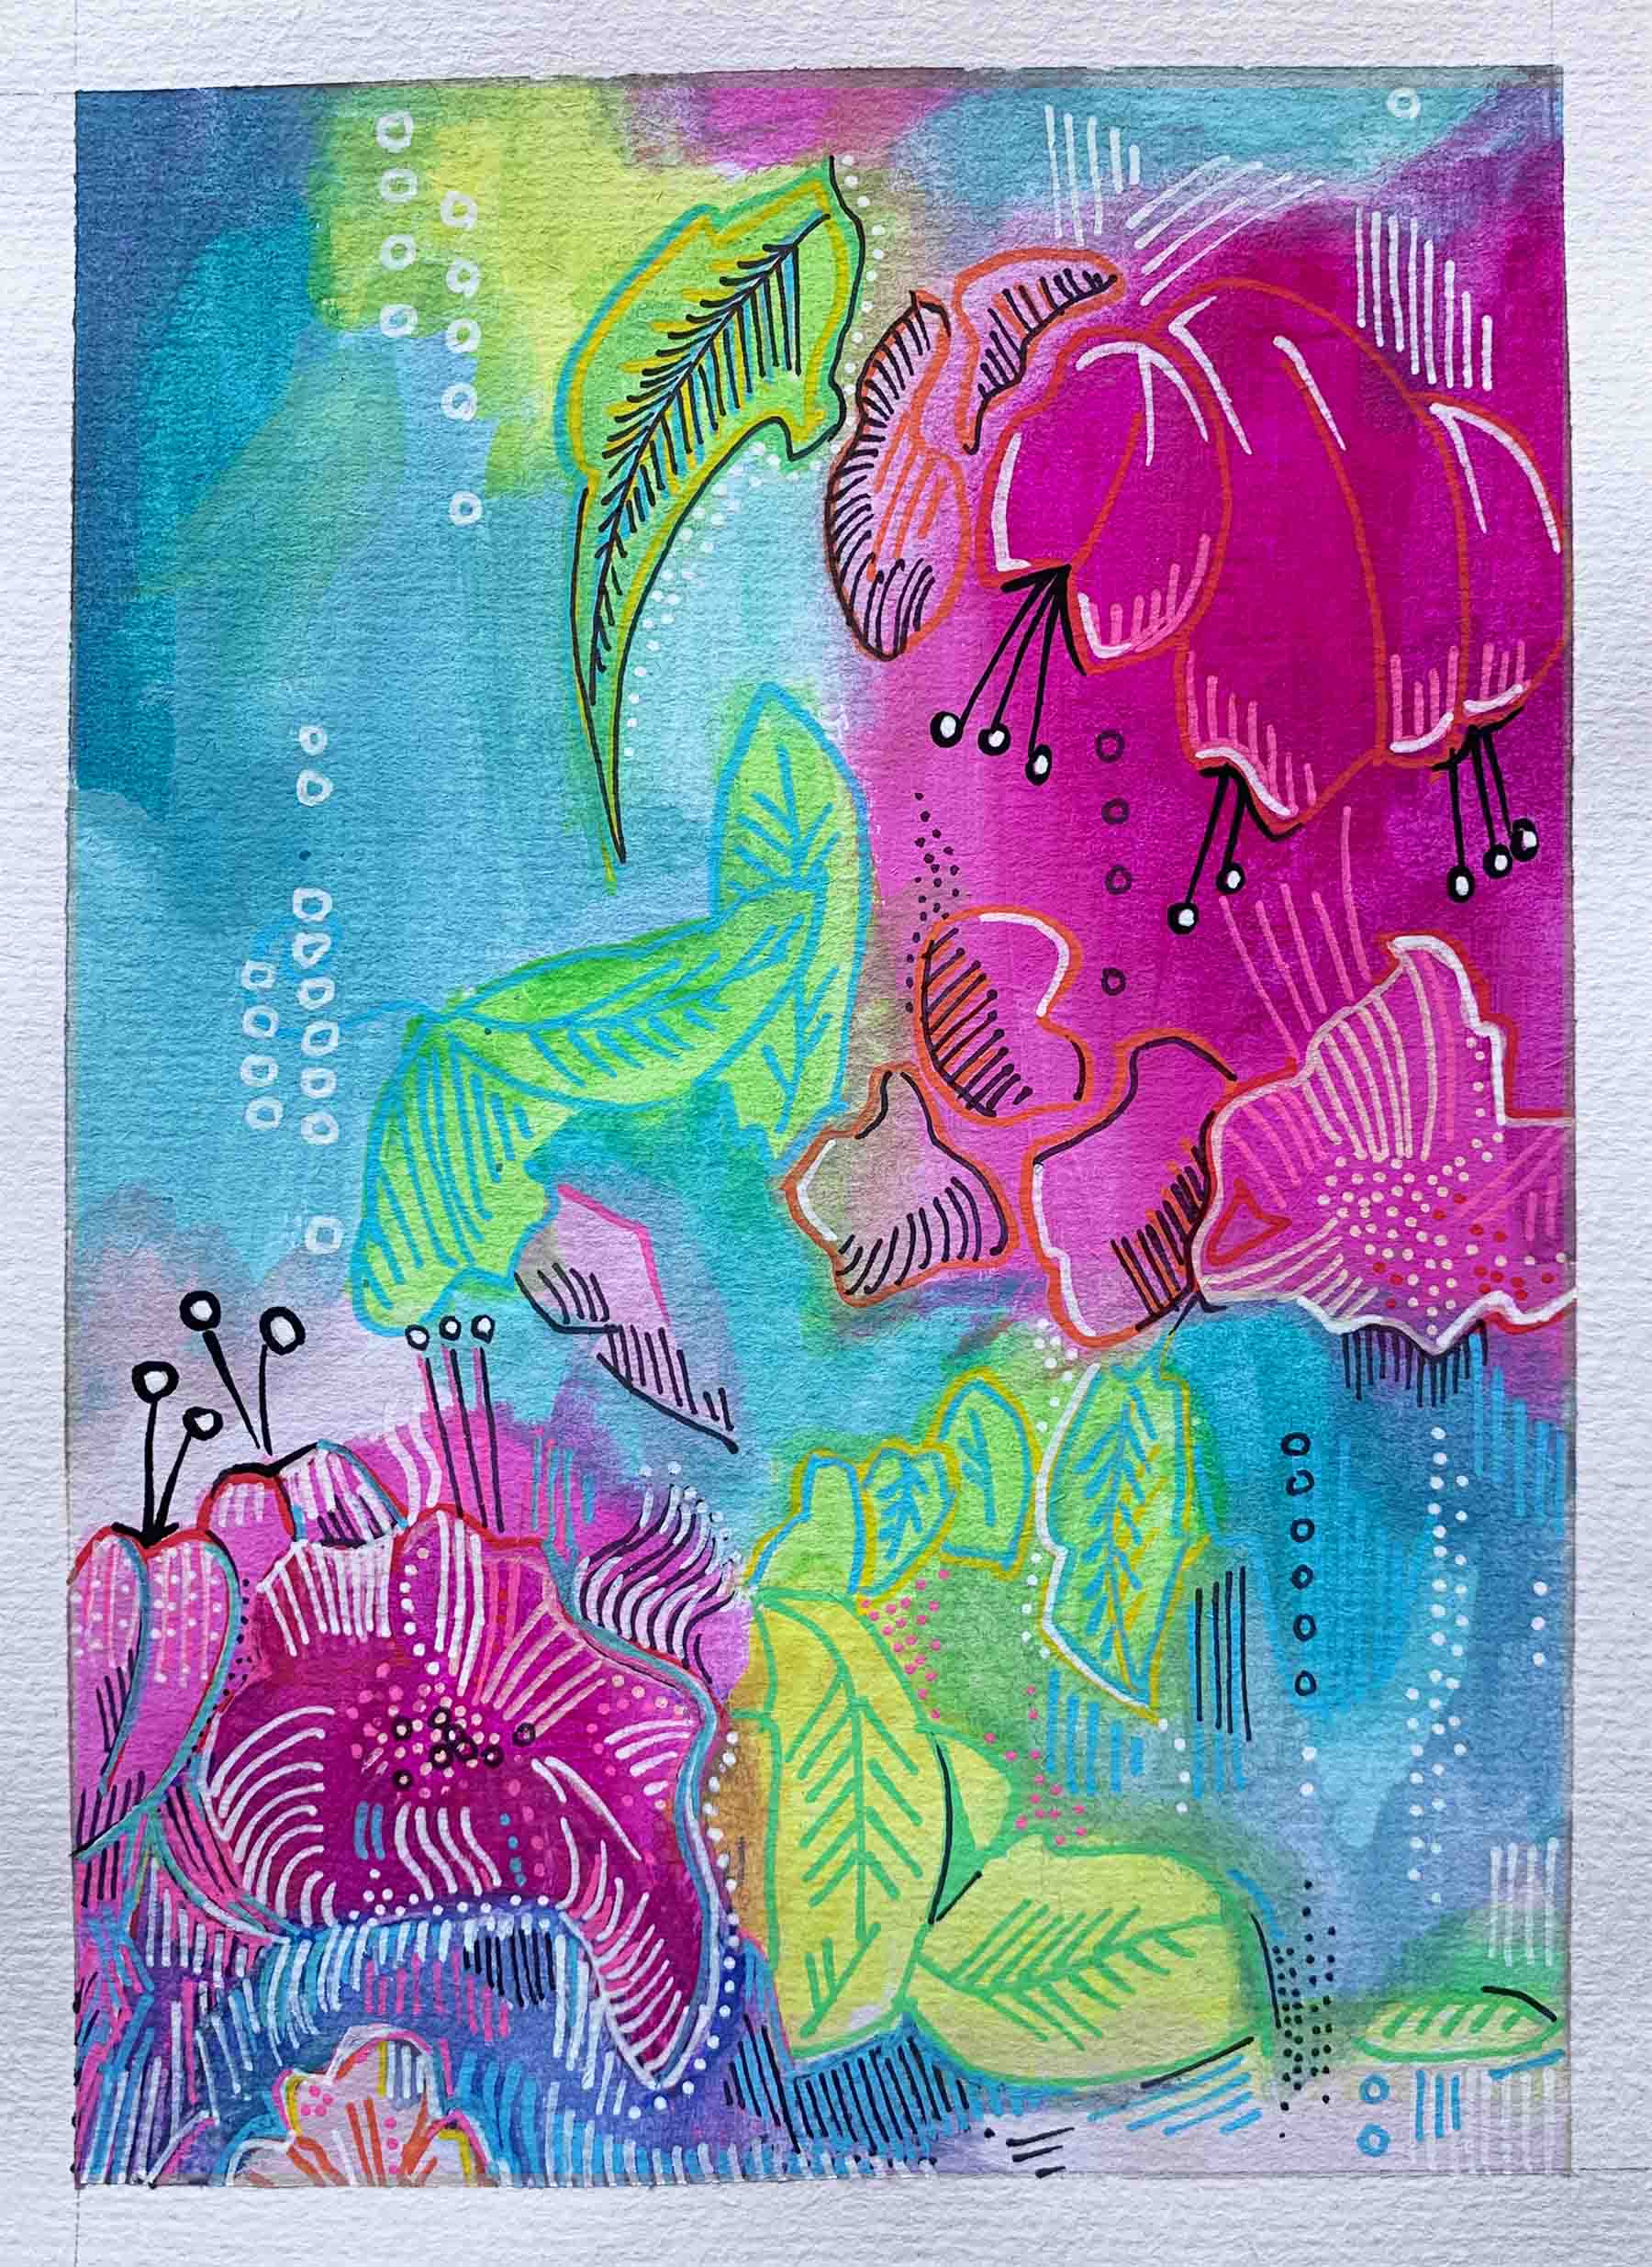 art every day number 604 / painting / pink flowers